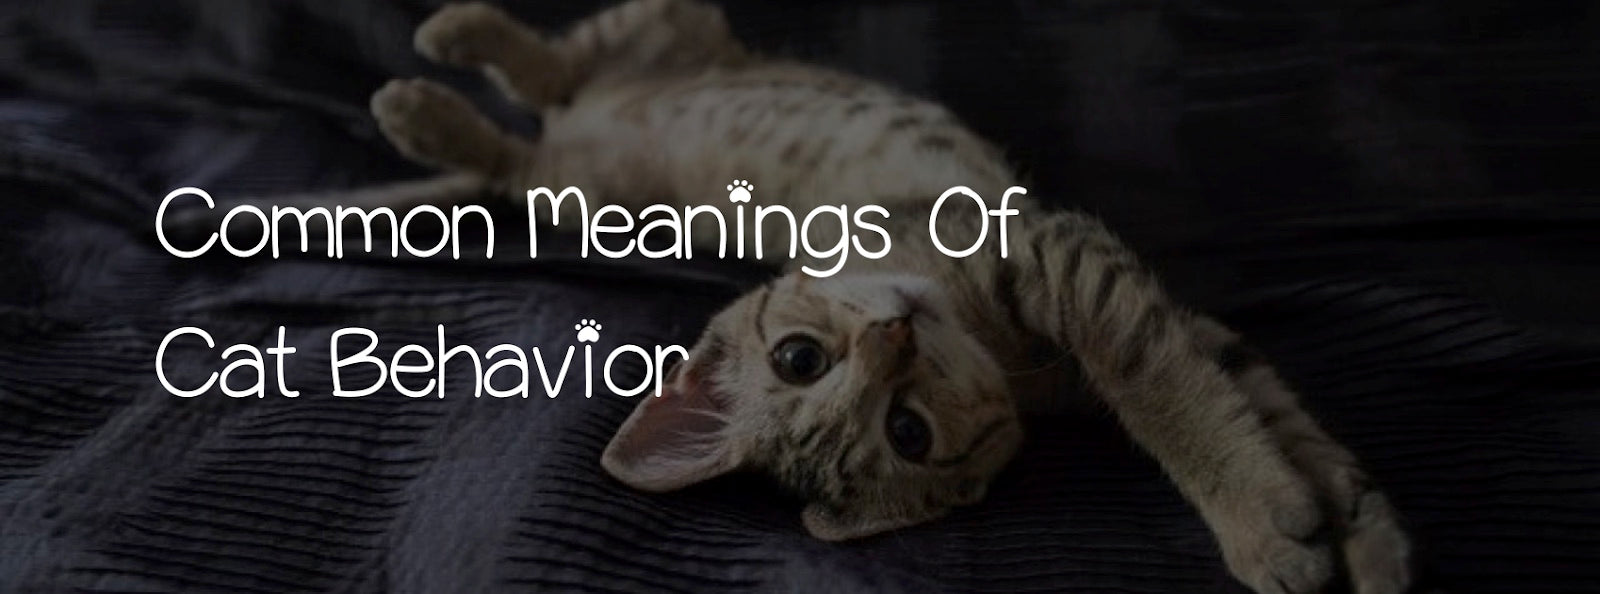 COMMON MEANINGS OF CAT BEHAVIOR